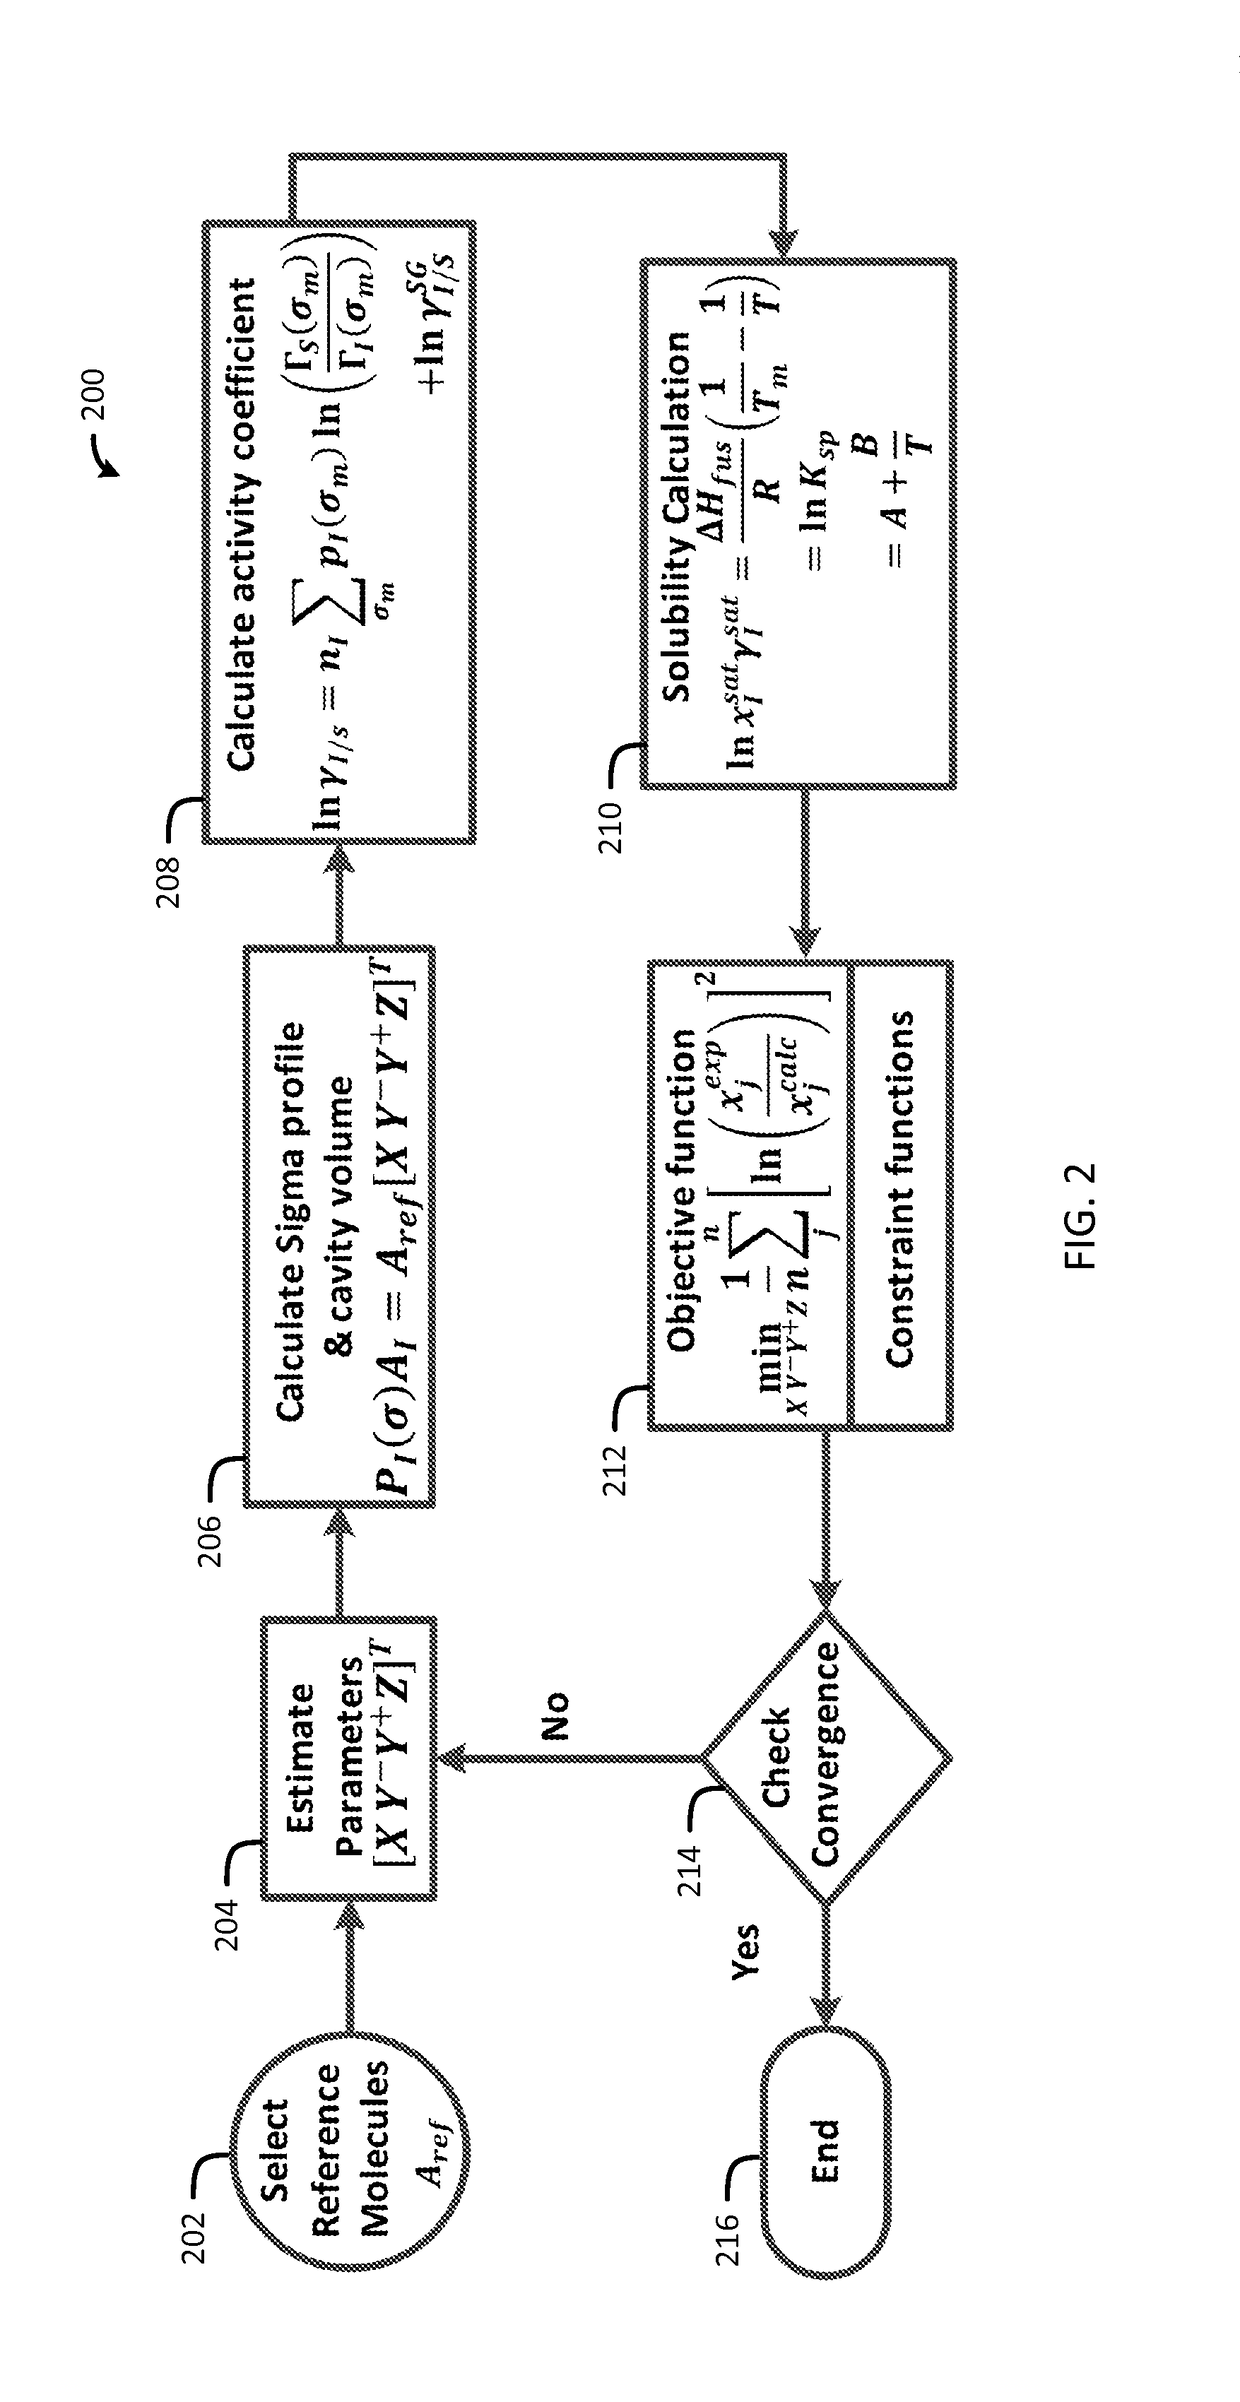 Apparatus and Computerized Method for Optimizing or Generating a Sigma Profile for a Molecule